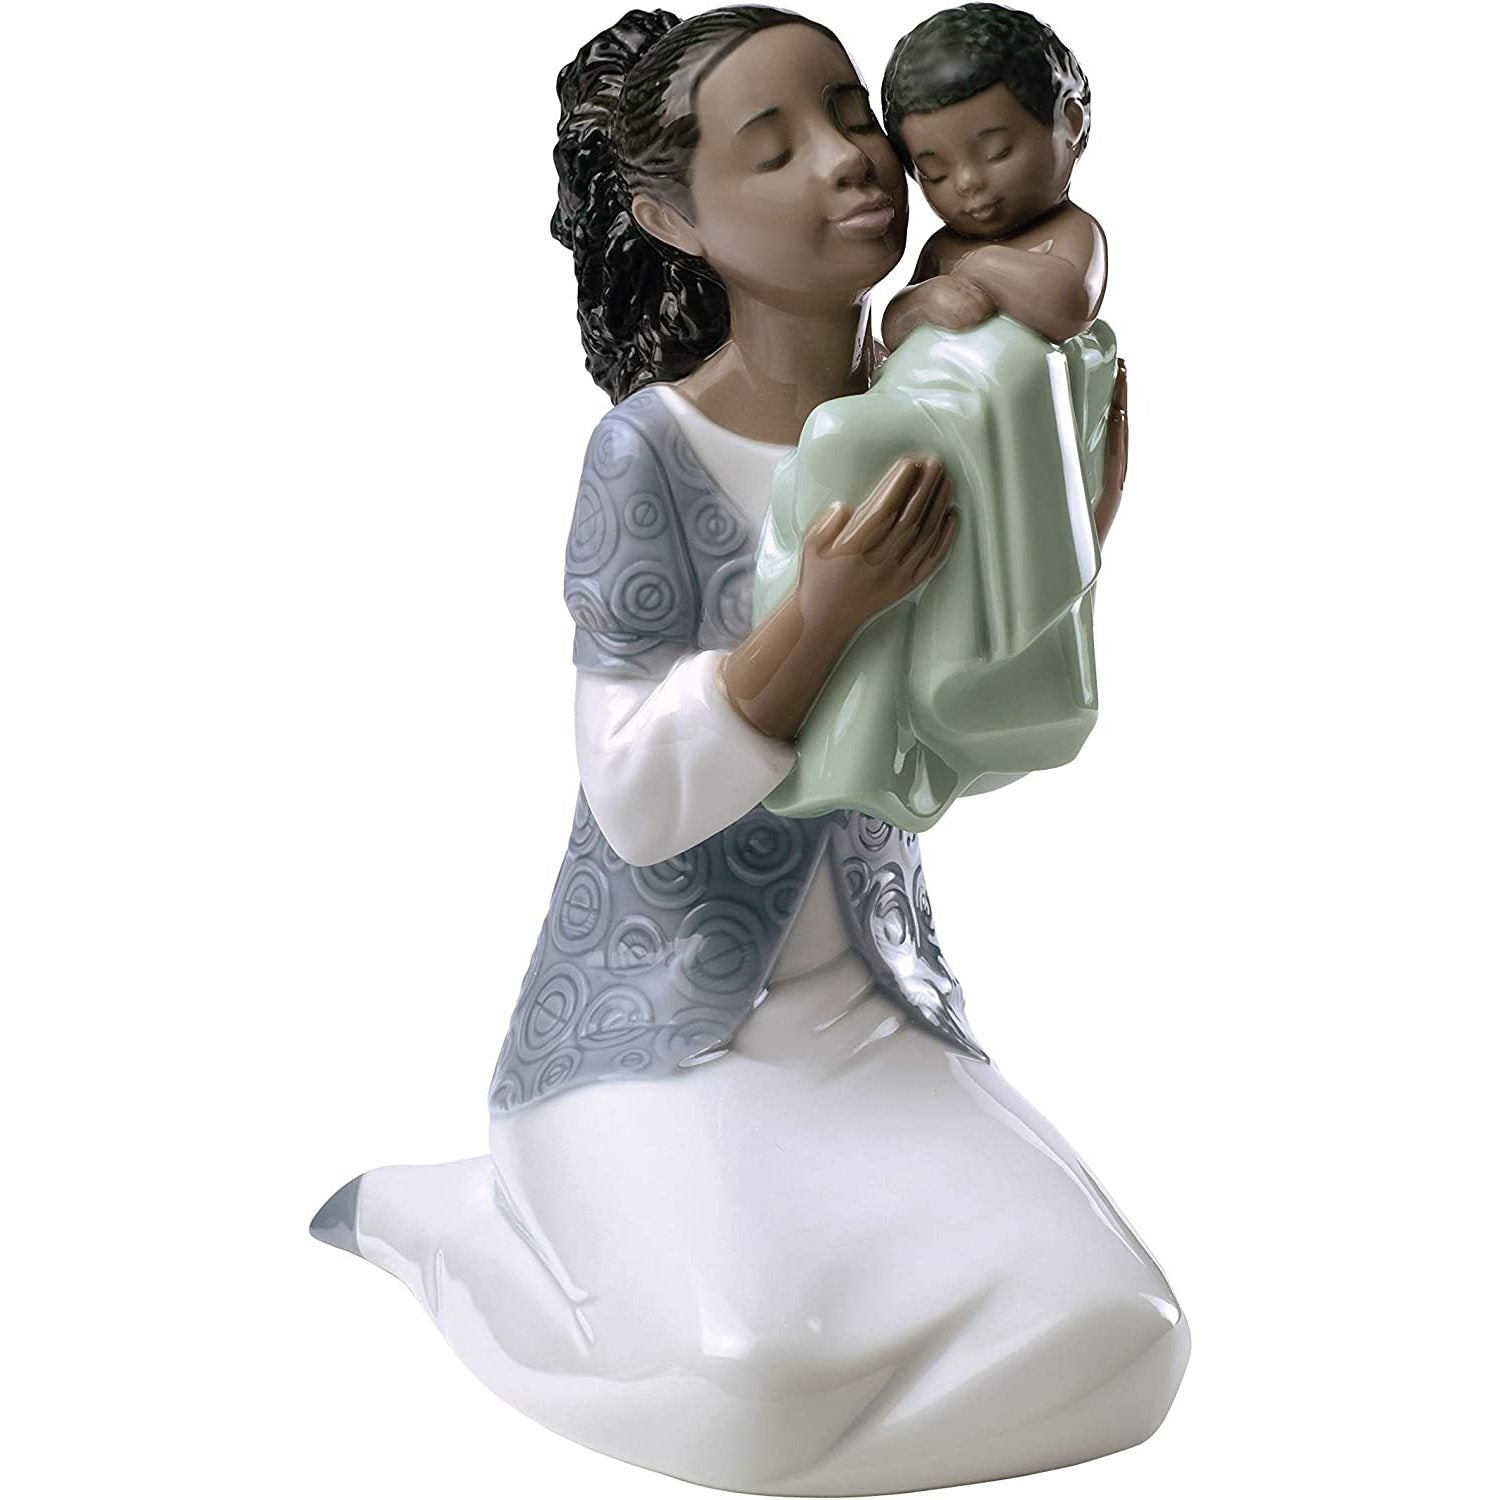 1 of 3: In Loving Arms: A Mother's Love African American Porcelain Figurine